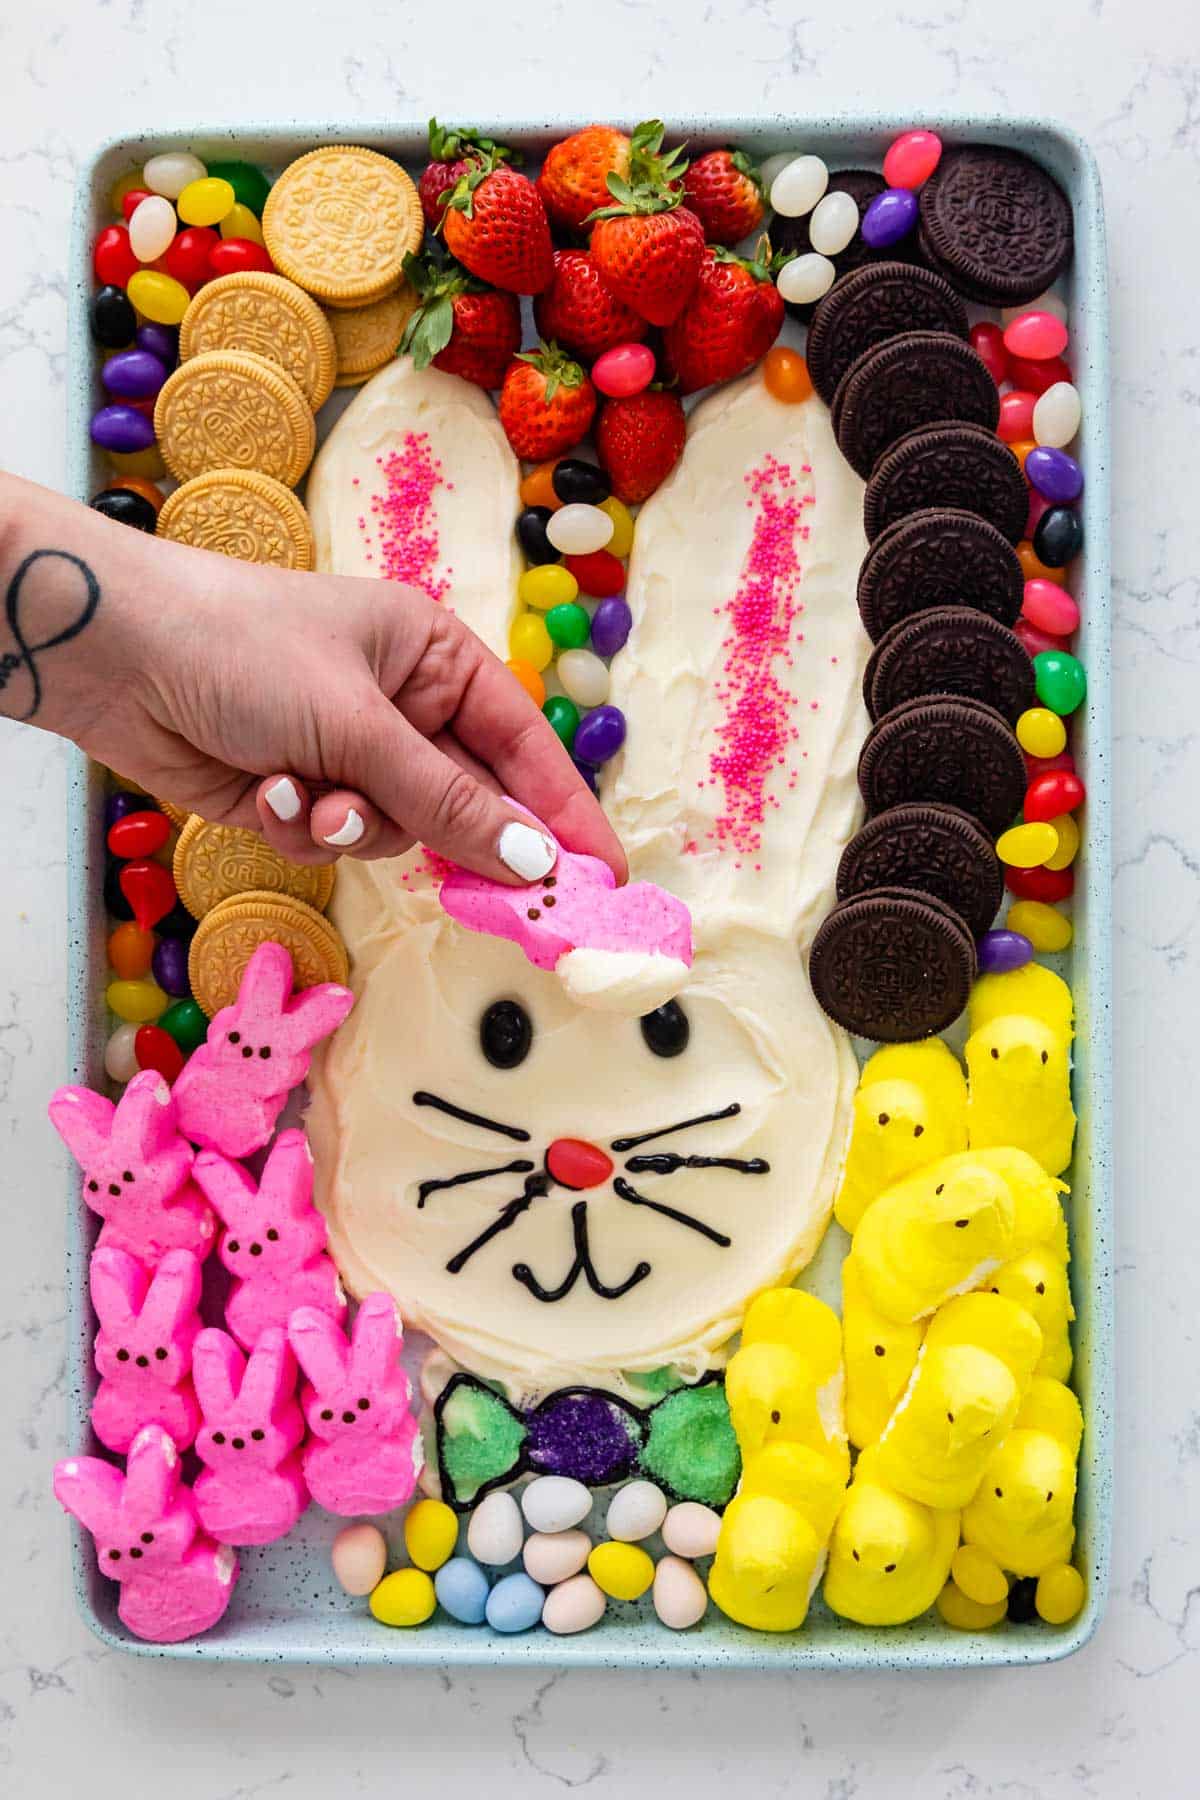 bunny shaped out of frosting and surrounded by jelly beans, marshmallows and oreos.